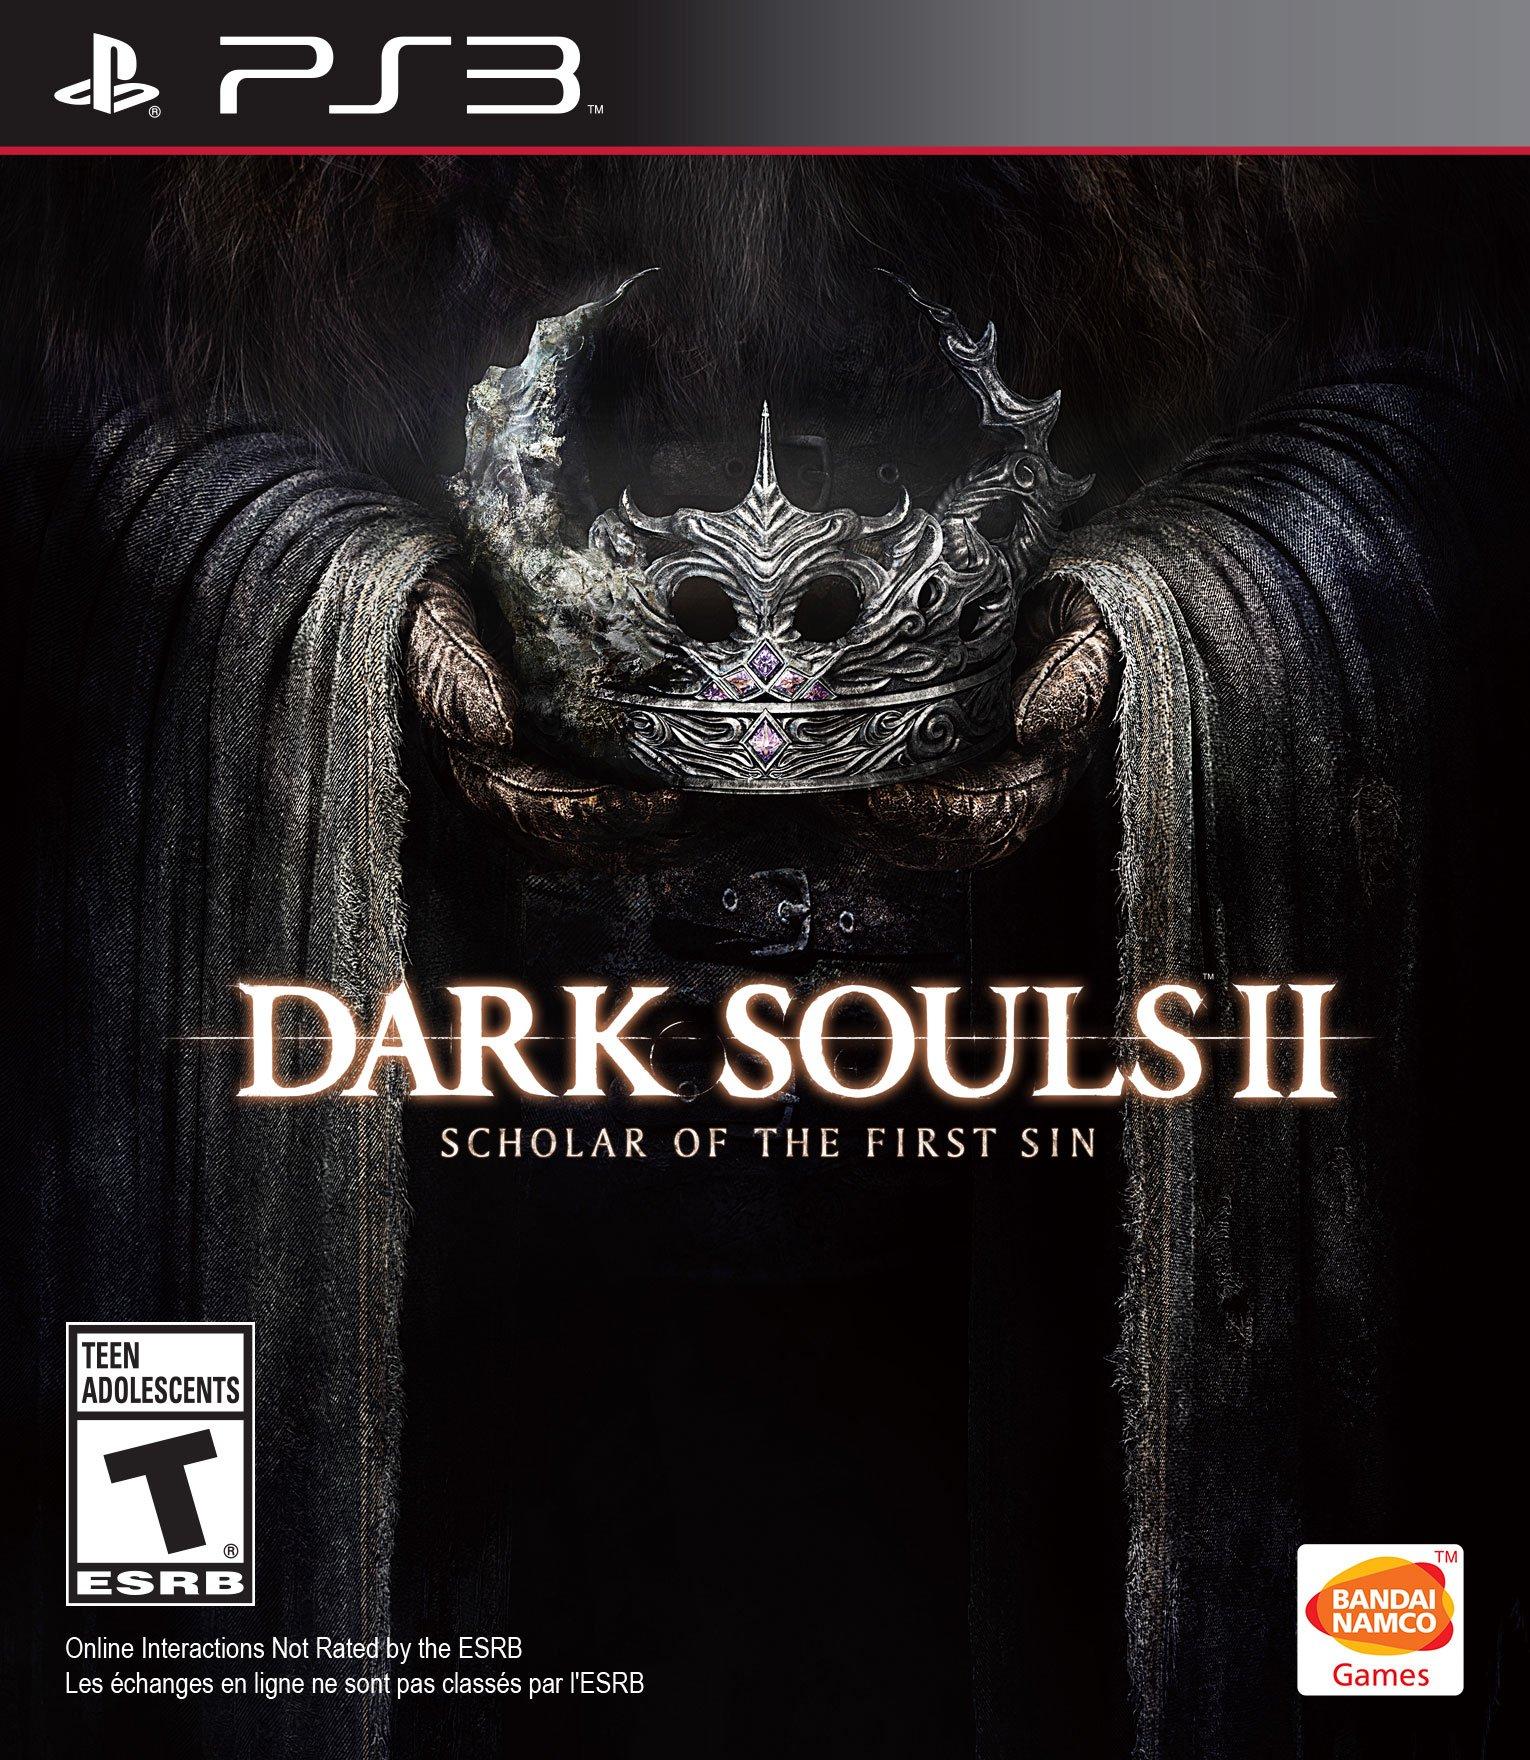 Dark Souls II: Scholar of the First Sin PS4 Replacement Box Insert Art Only